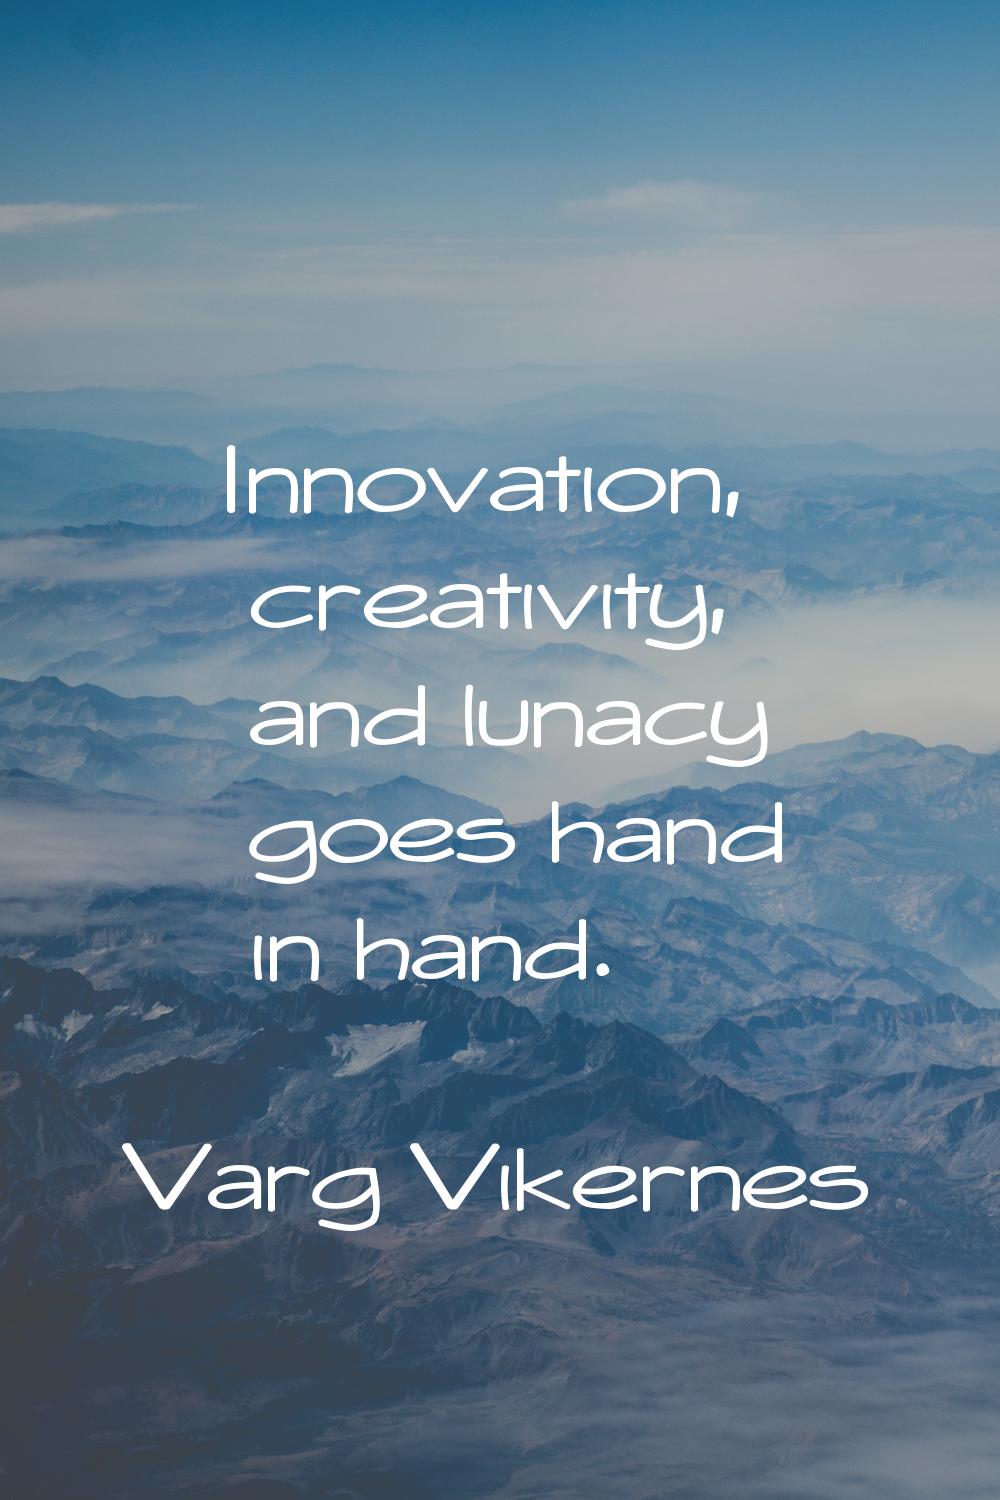 Innovation, creativity, and lunacy goes hand in hand.